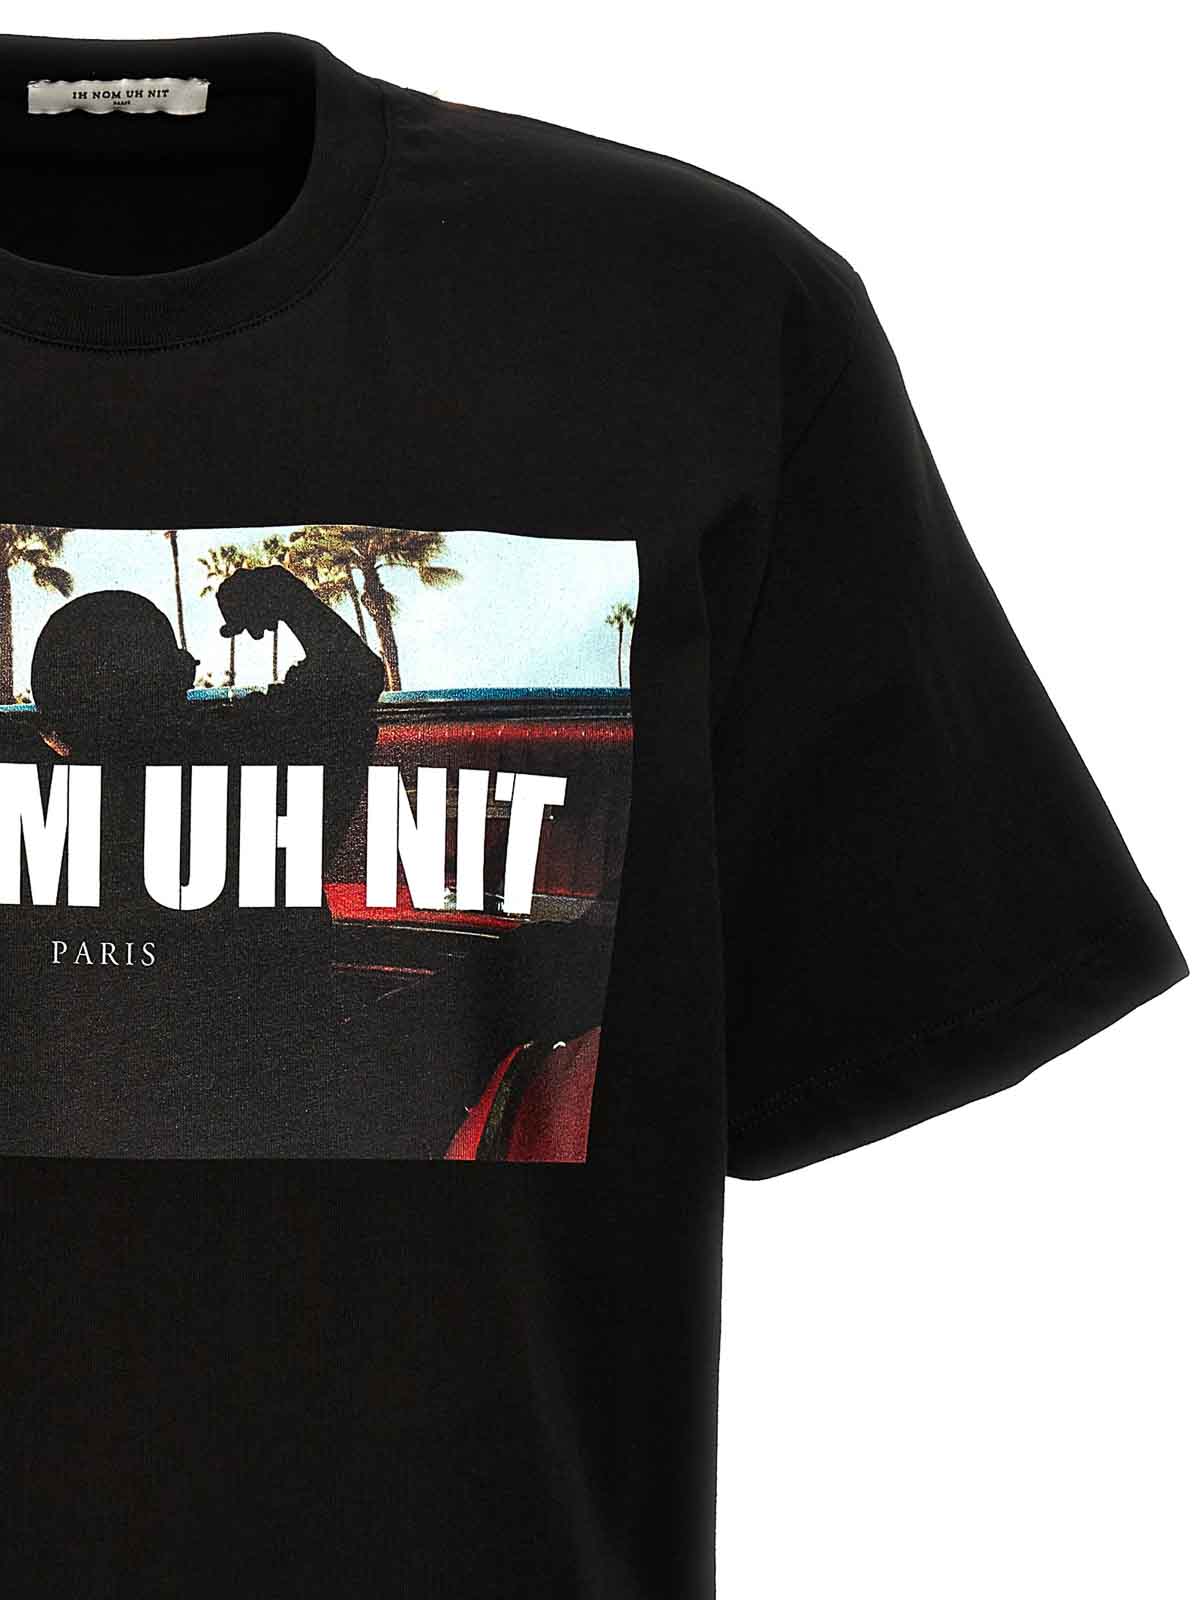 Shop Ih Nom Uh Nit Palms And Car T-shirt In Negro